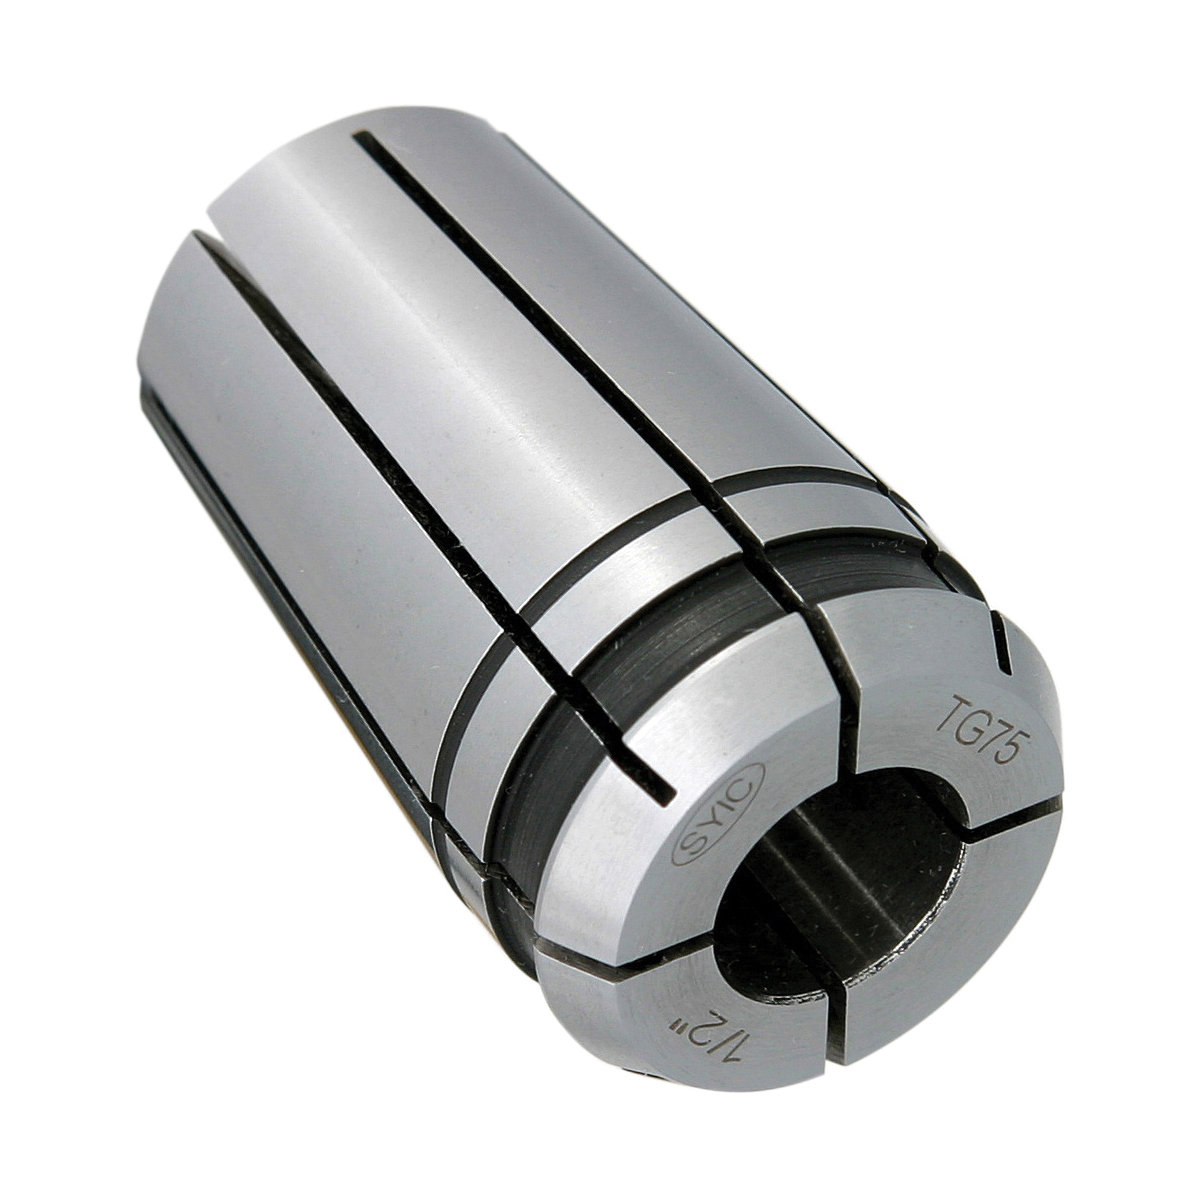 TG75 9/16" COLLET